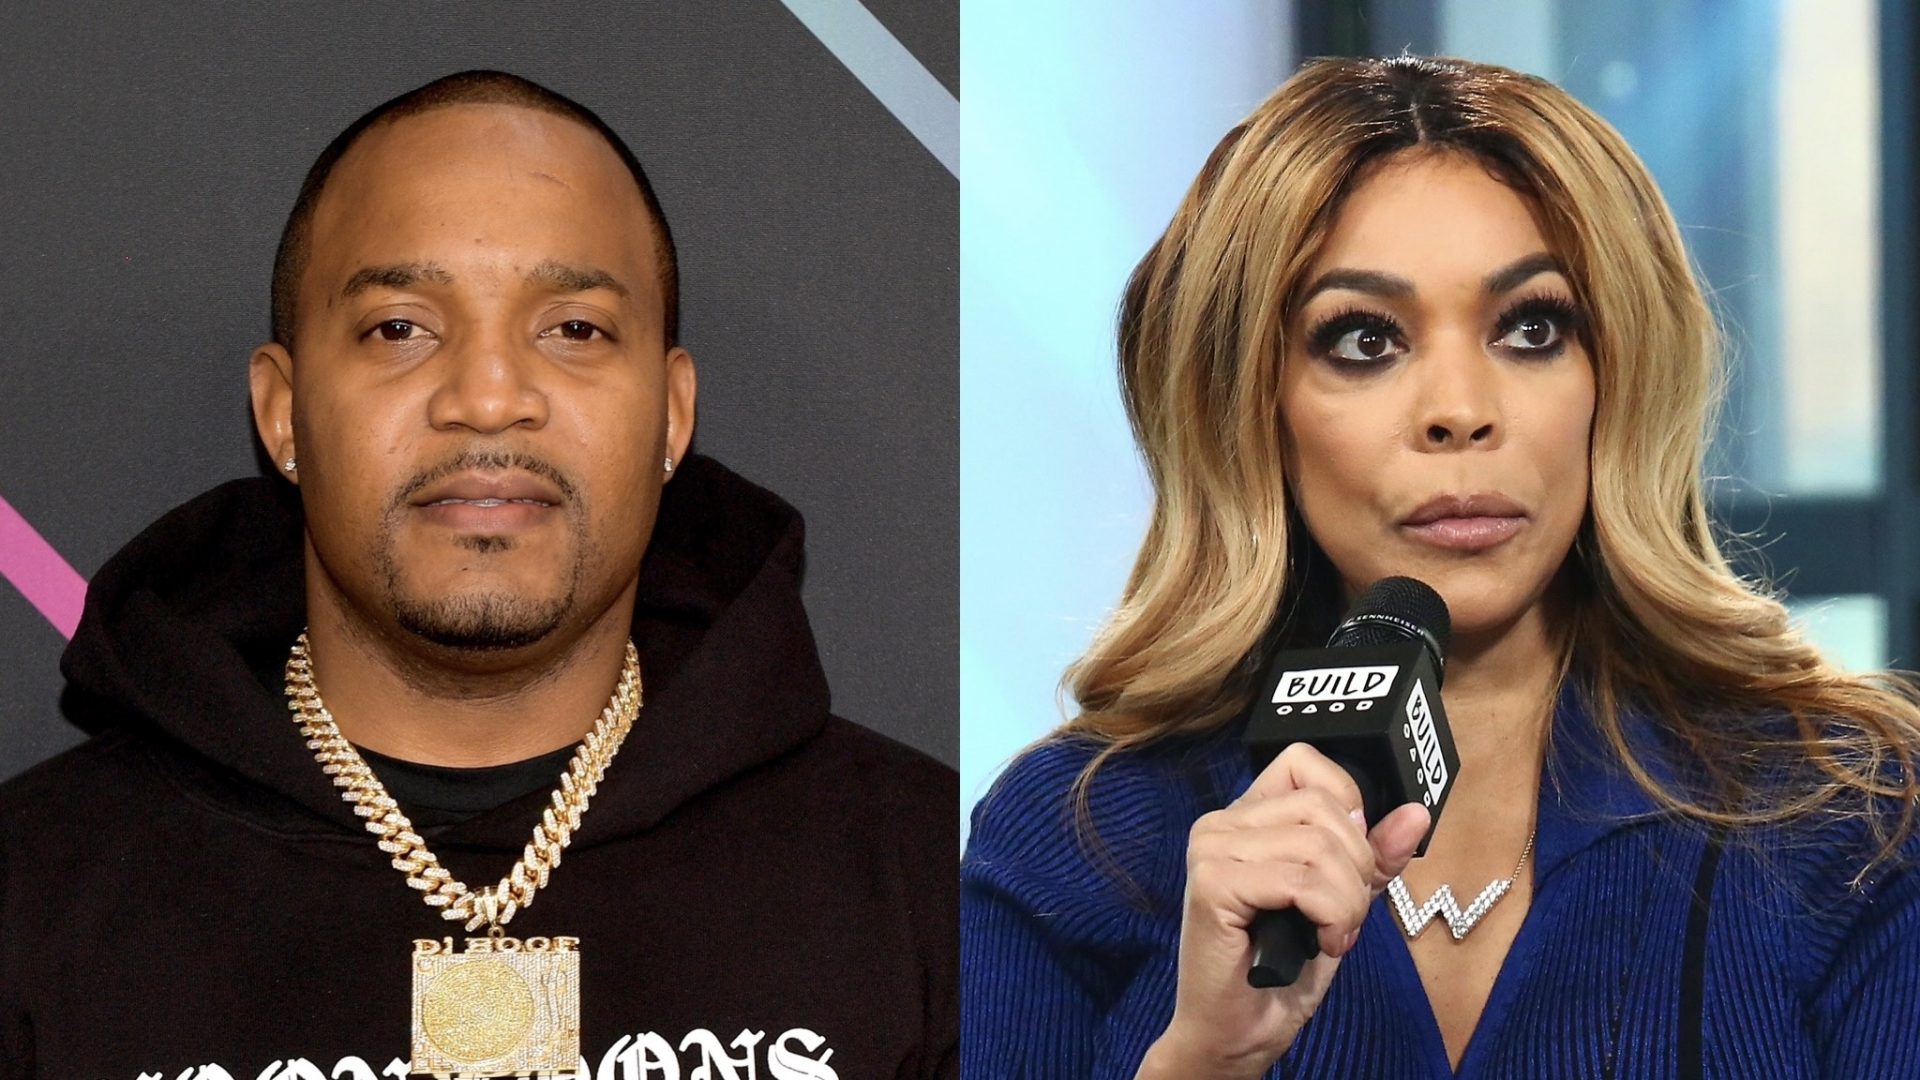 DJ Boof Speaks On Wendy Williams' Health Battle, Finding Her "Unresponsive," And The Conflict Between Her Family & Guardianship (WATCH)